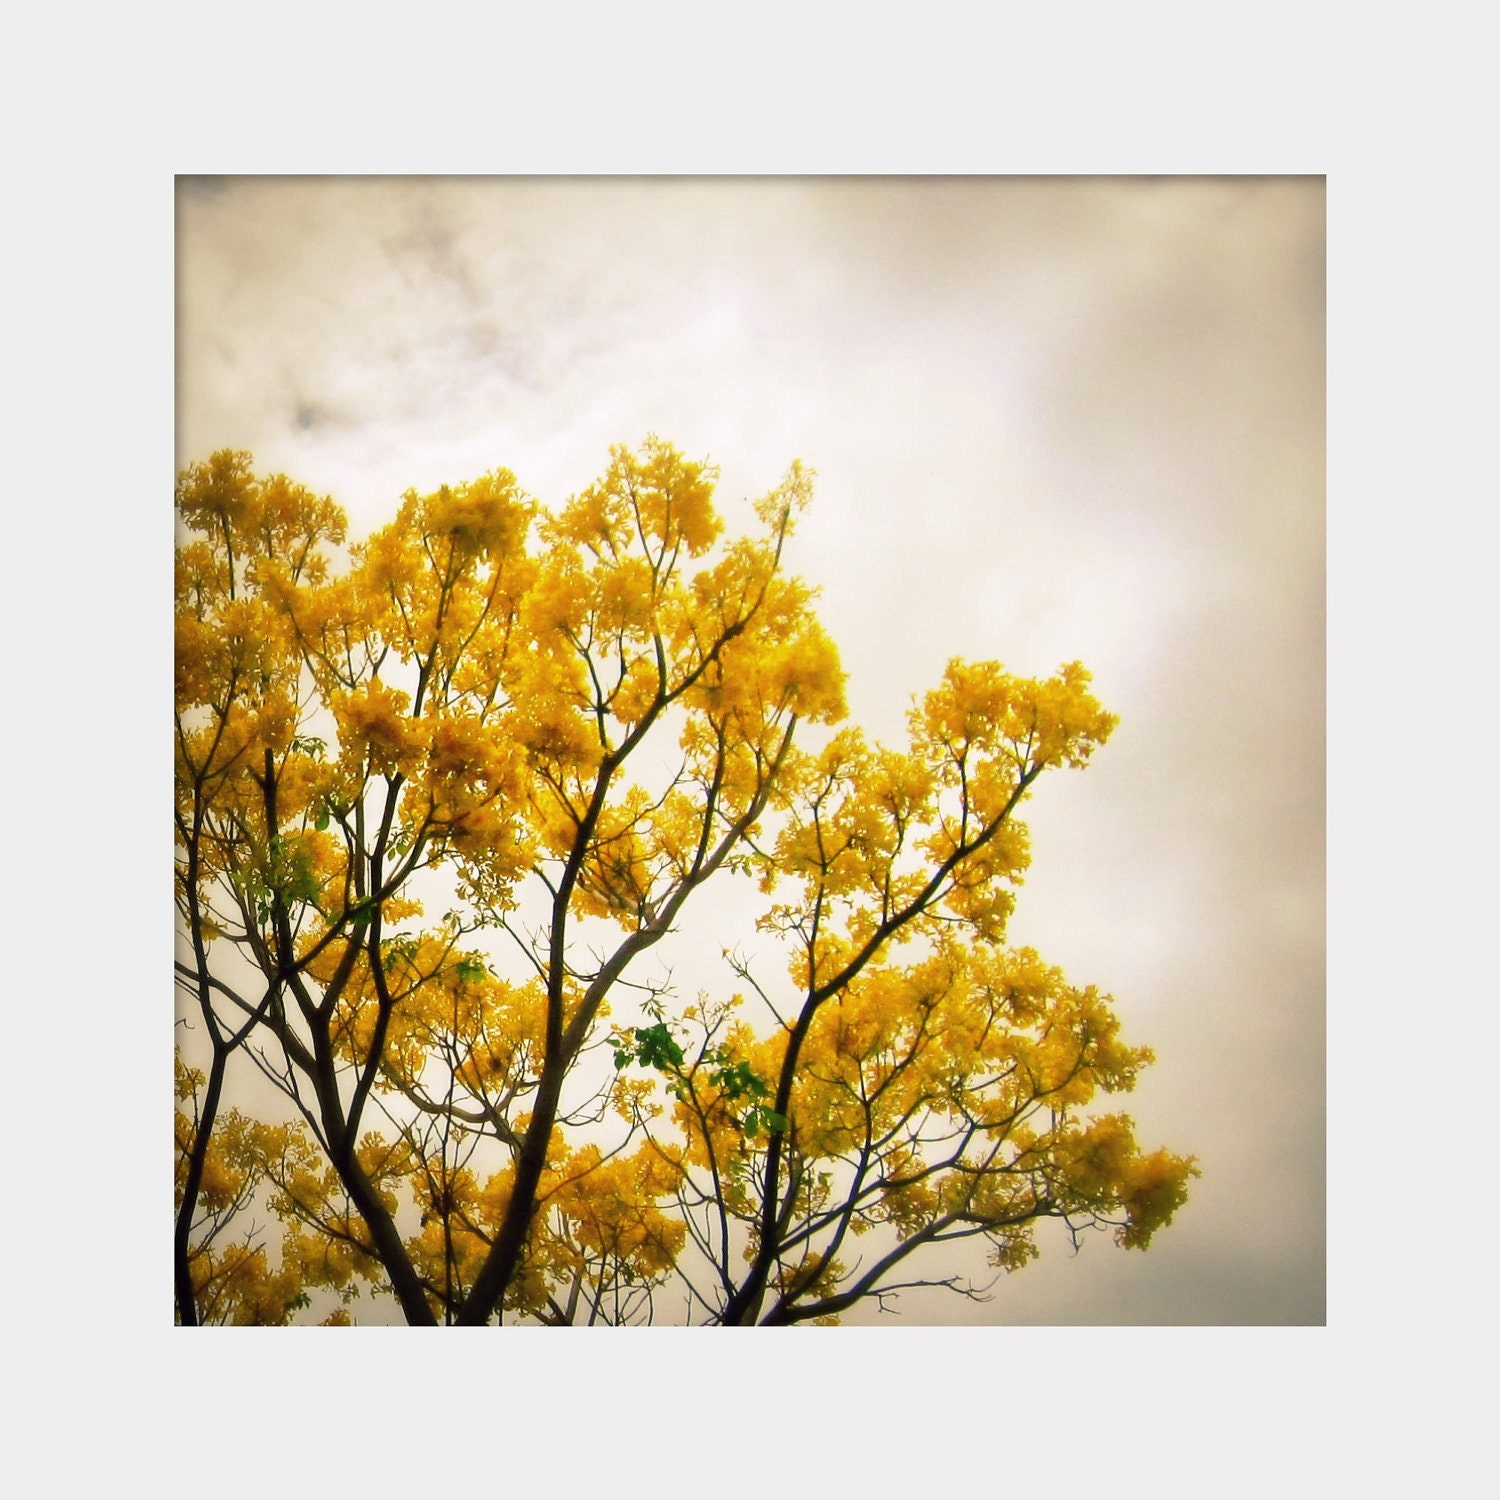 Sunshine on a Cloudy Day: square fine art photograph print of golden yellow flowering tree against gloomy gray sky - UninventedColors